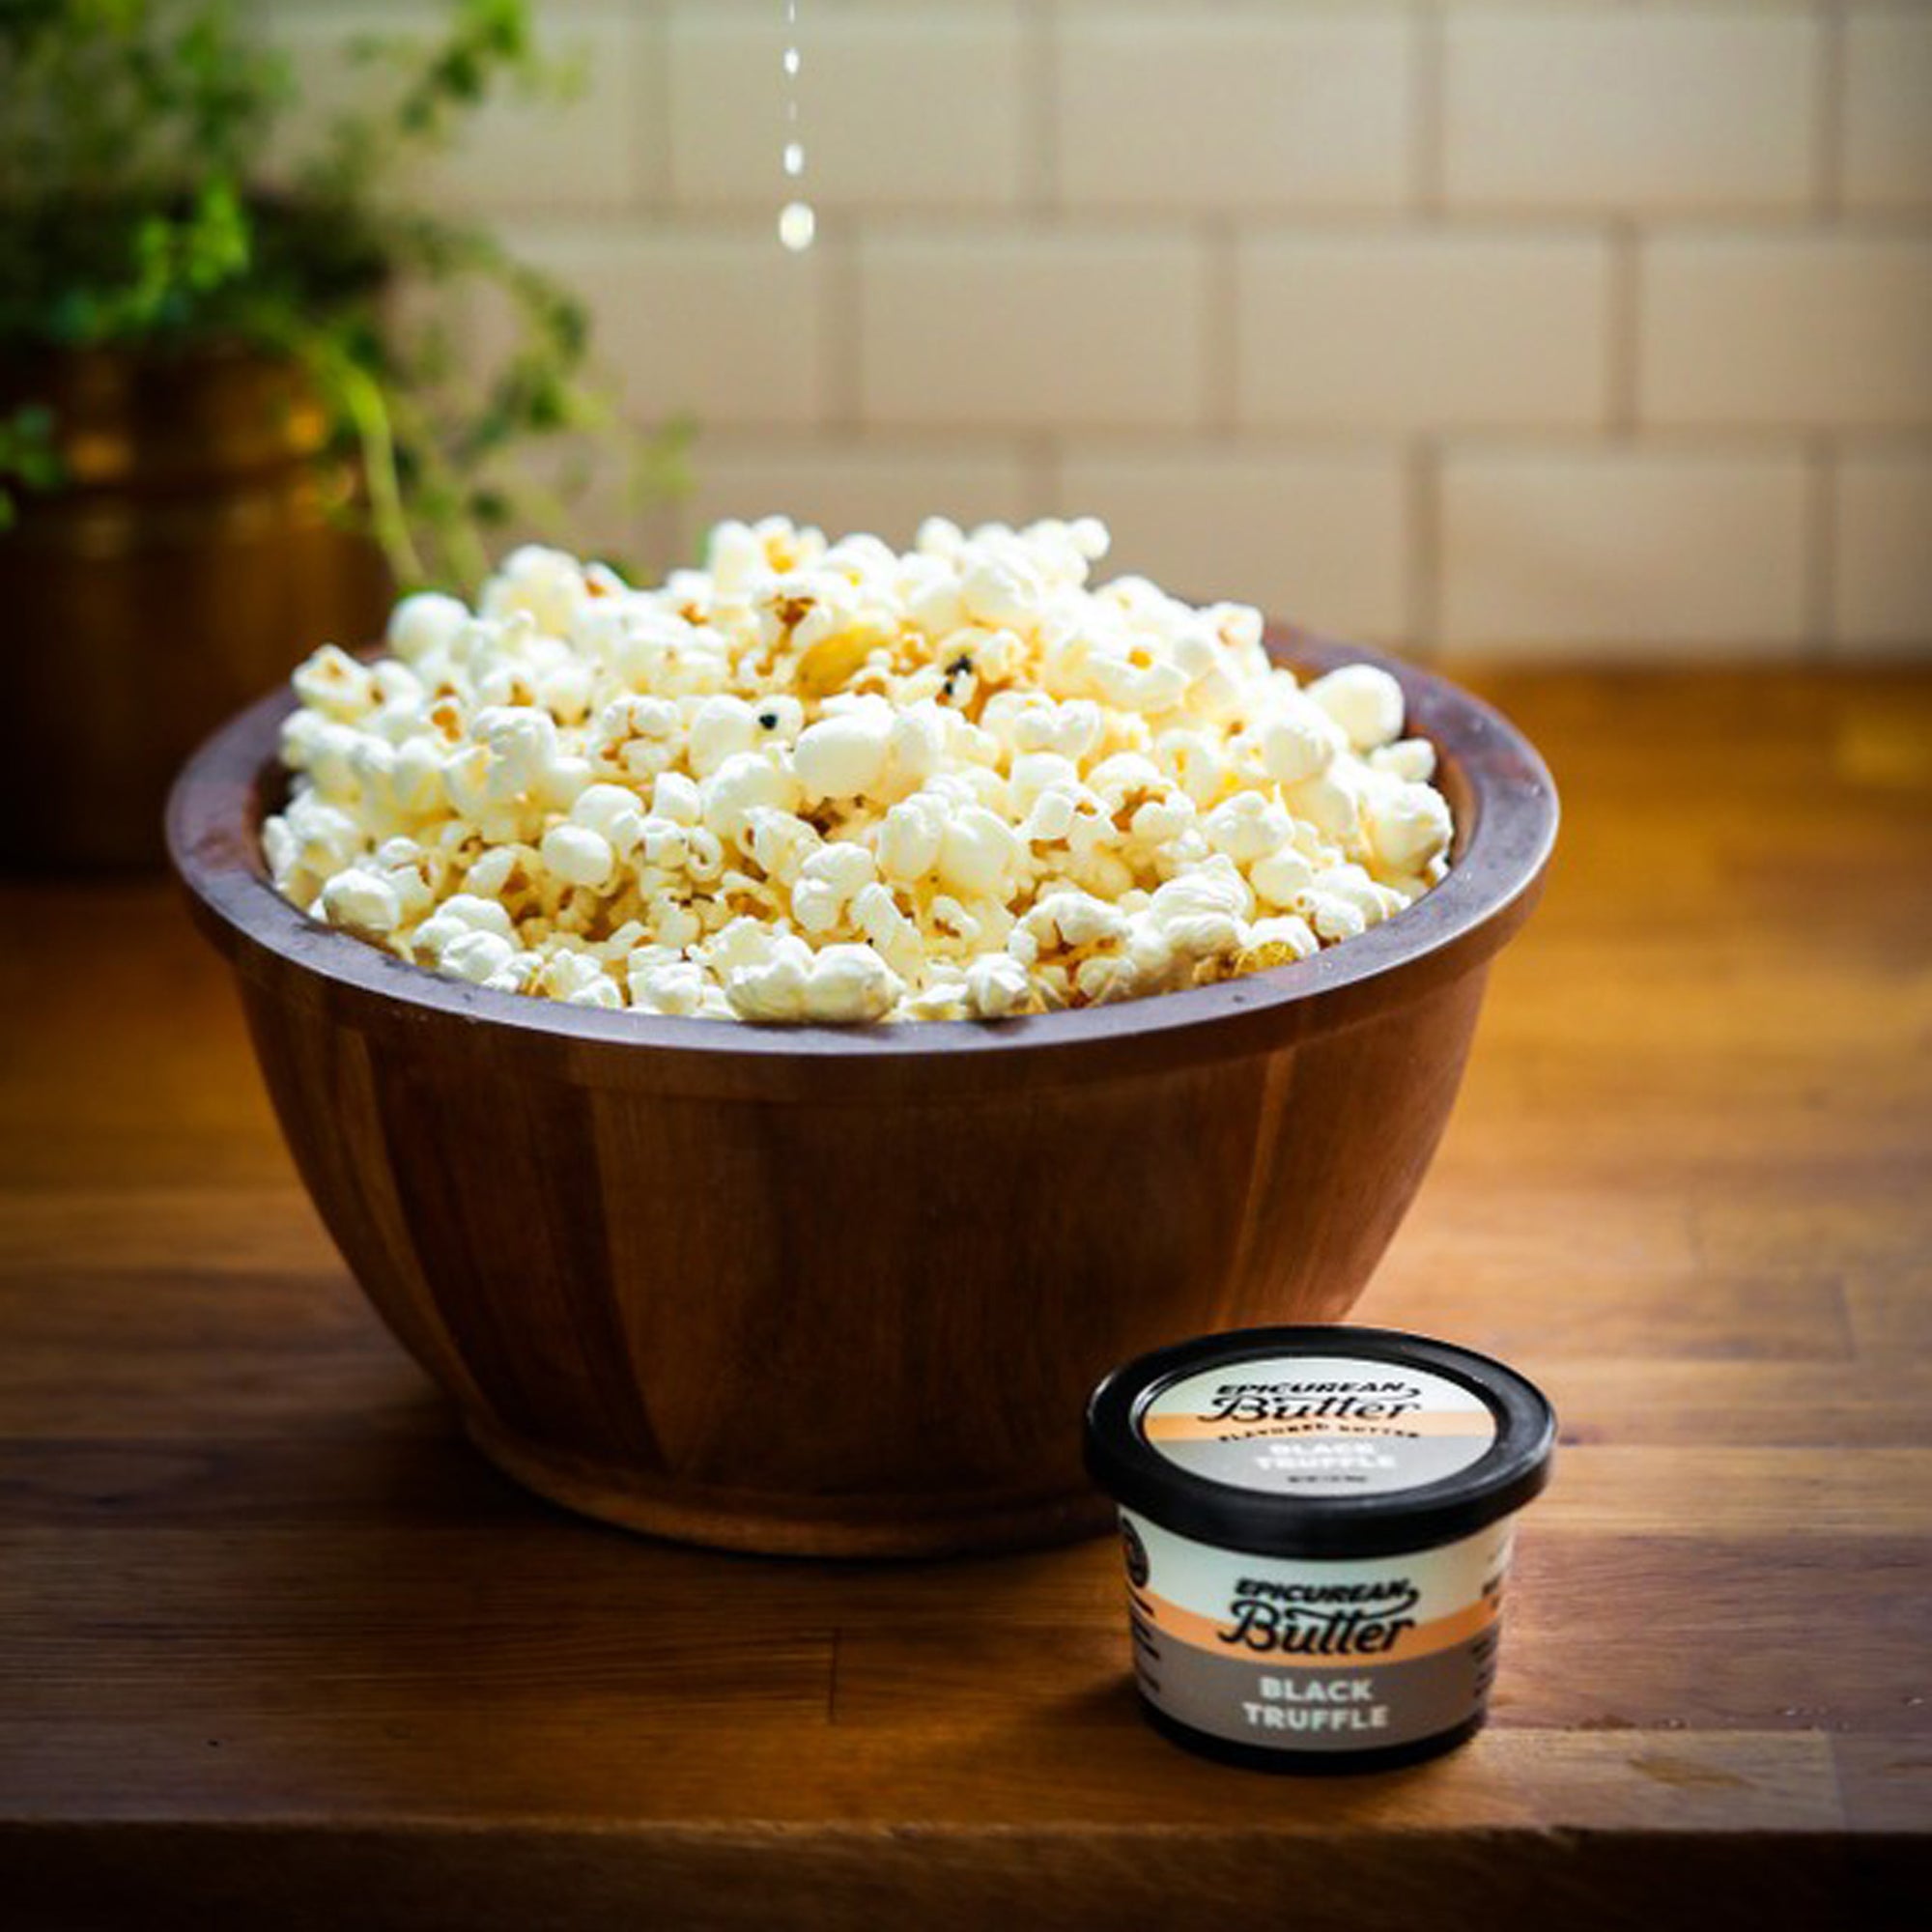 Popcorn drizzled with Black Truffle Flavored Butter